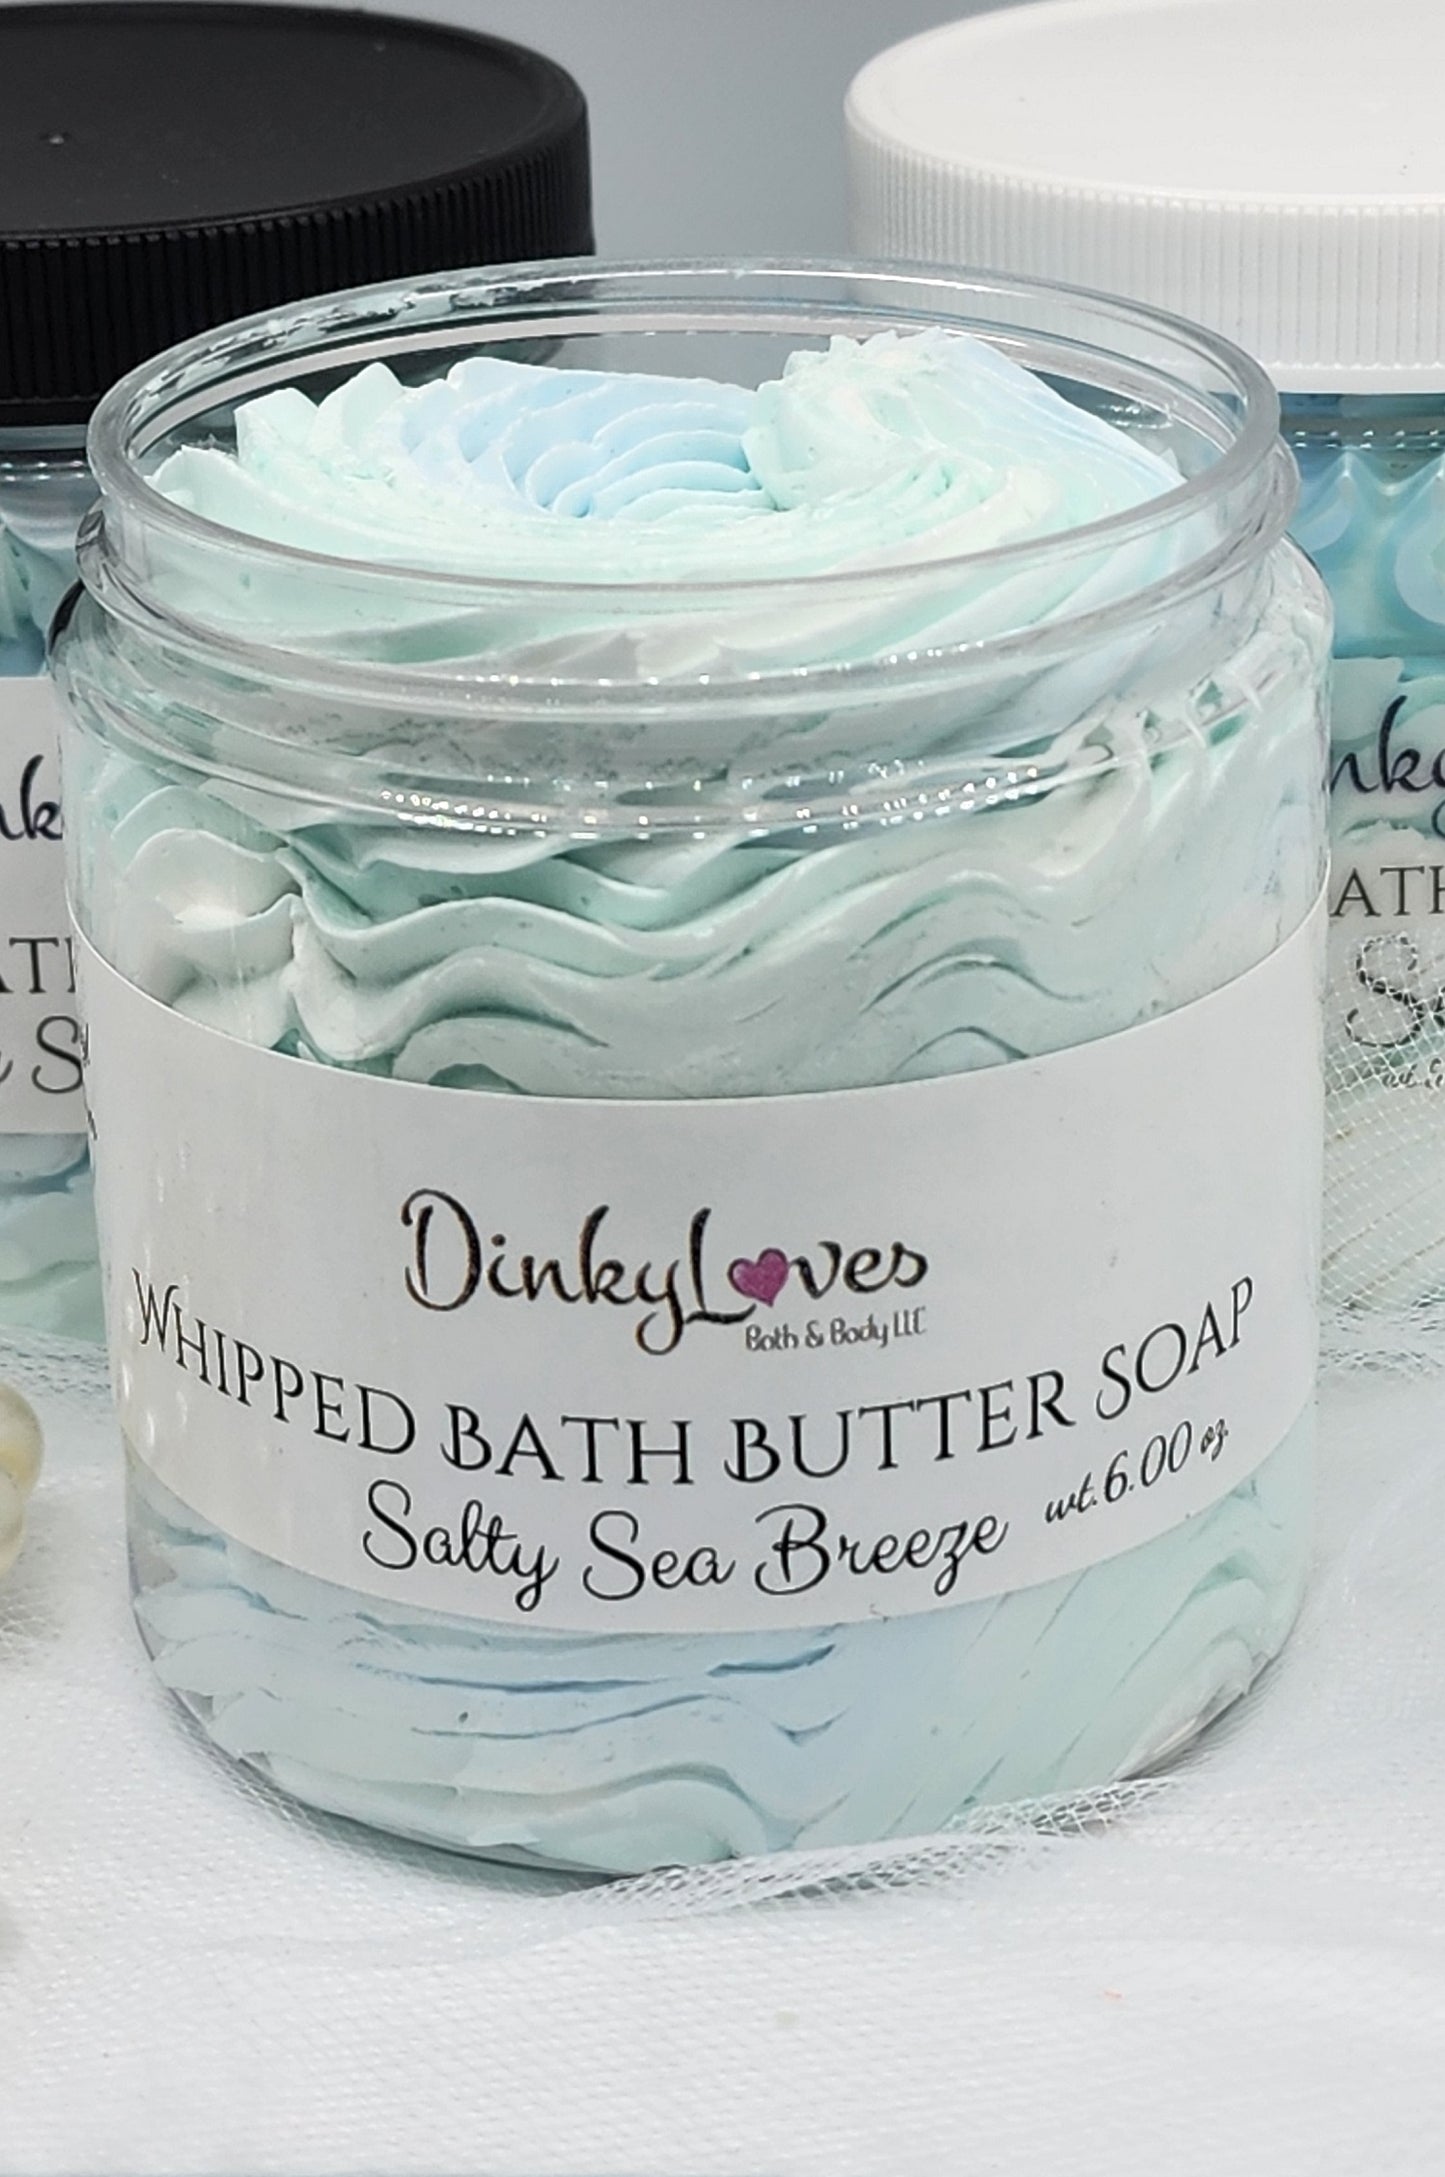 SALTY SEA BREEZE Whipped Bath Butter Soap / Gift Idea / Luxury Product / Cocoa Butter